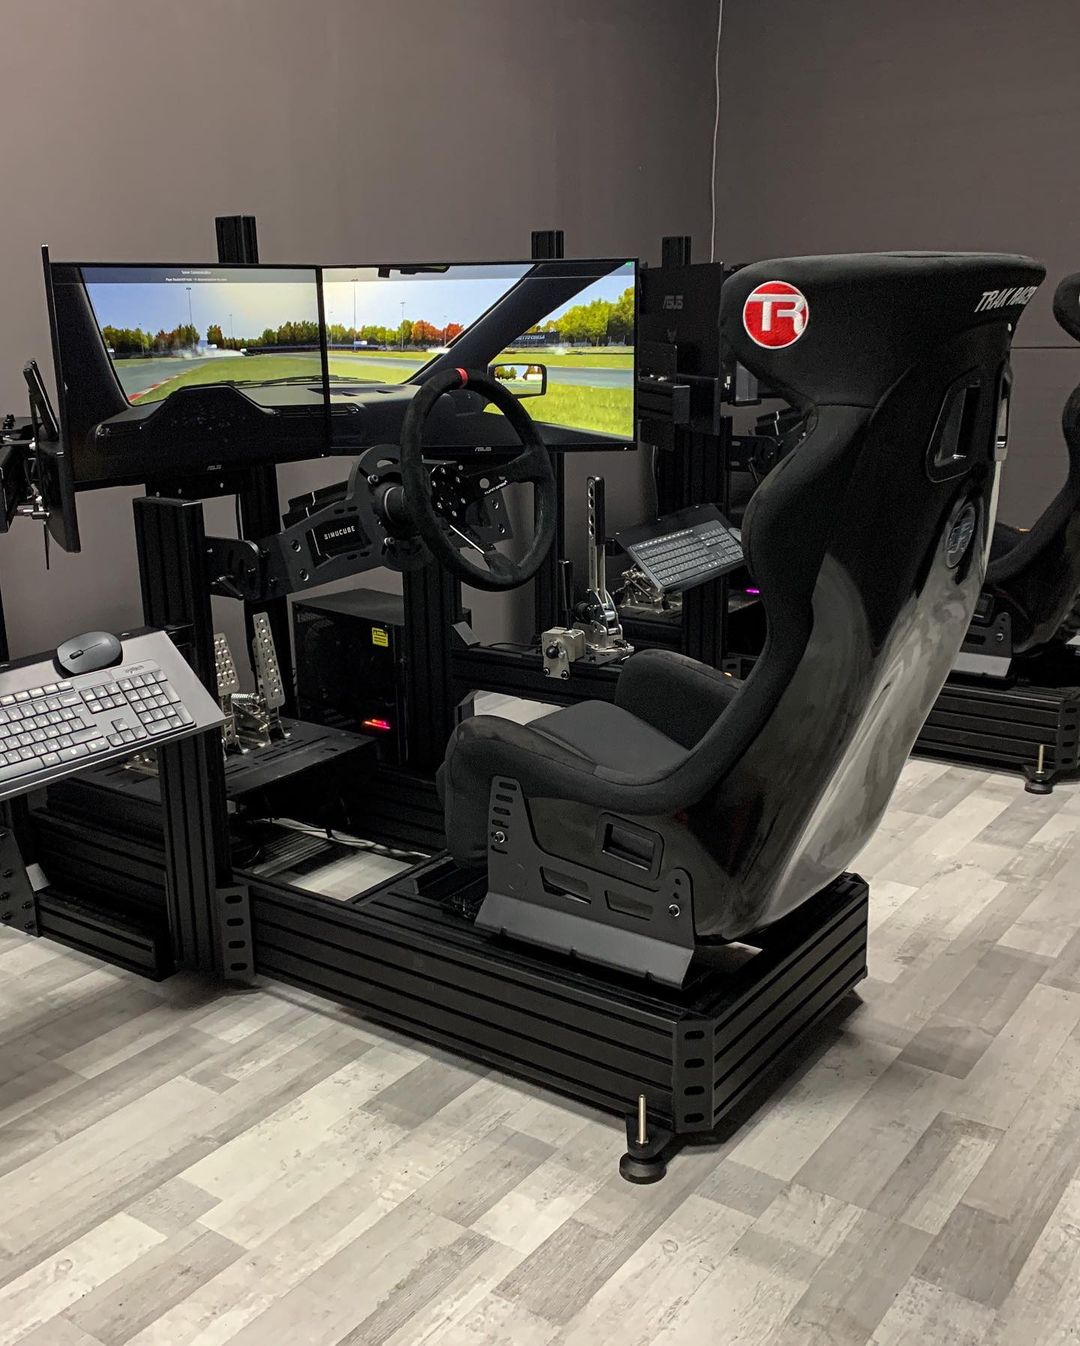 SIMHUB proudly presents the best simulators assembled for Lukyanov Motorsport